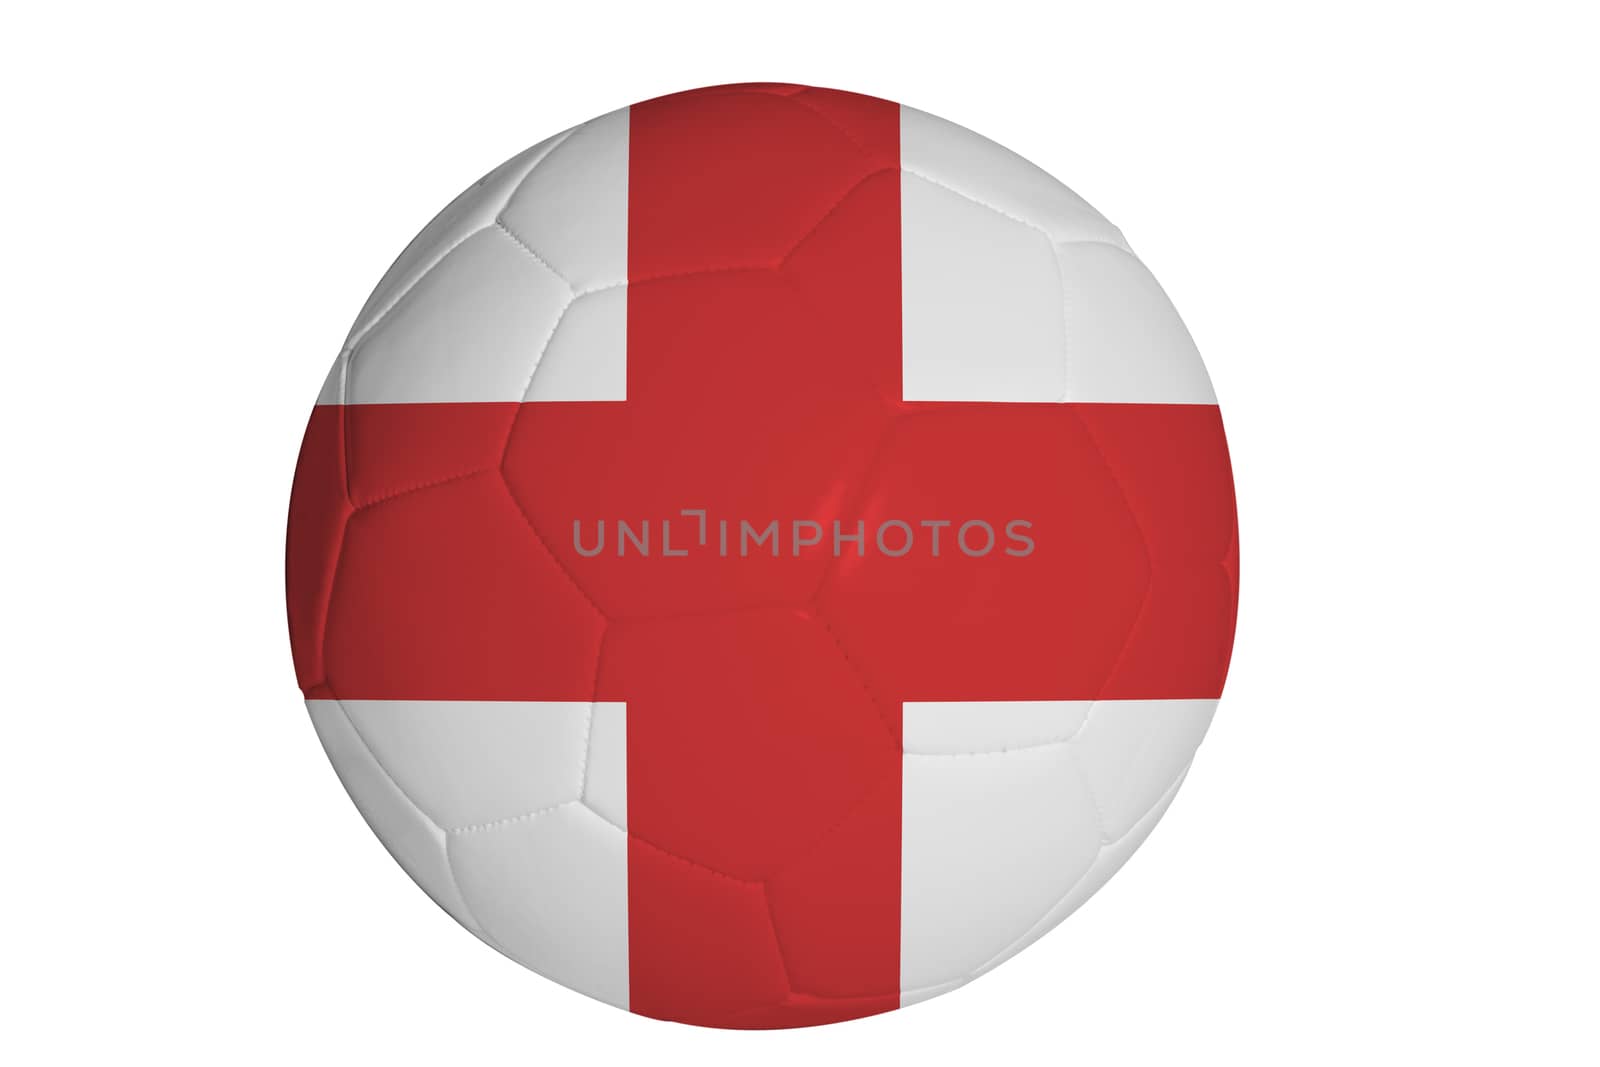 English flag graphic on soccer ball isolated on white